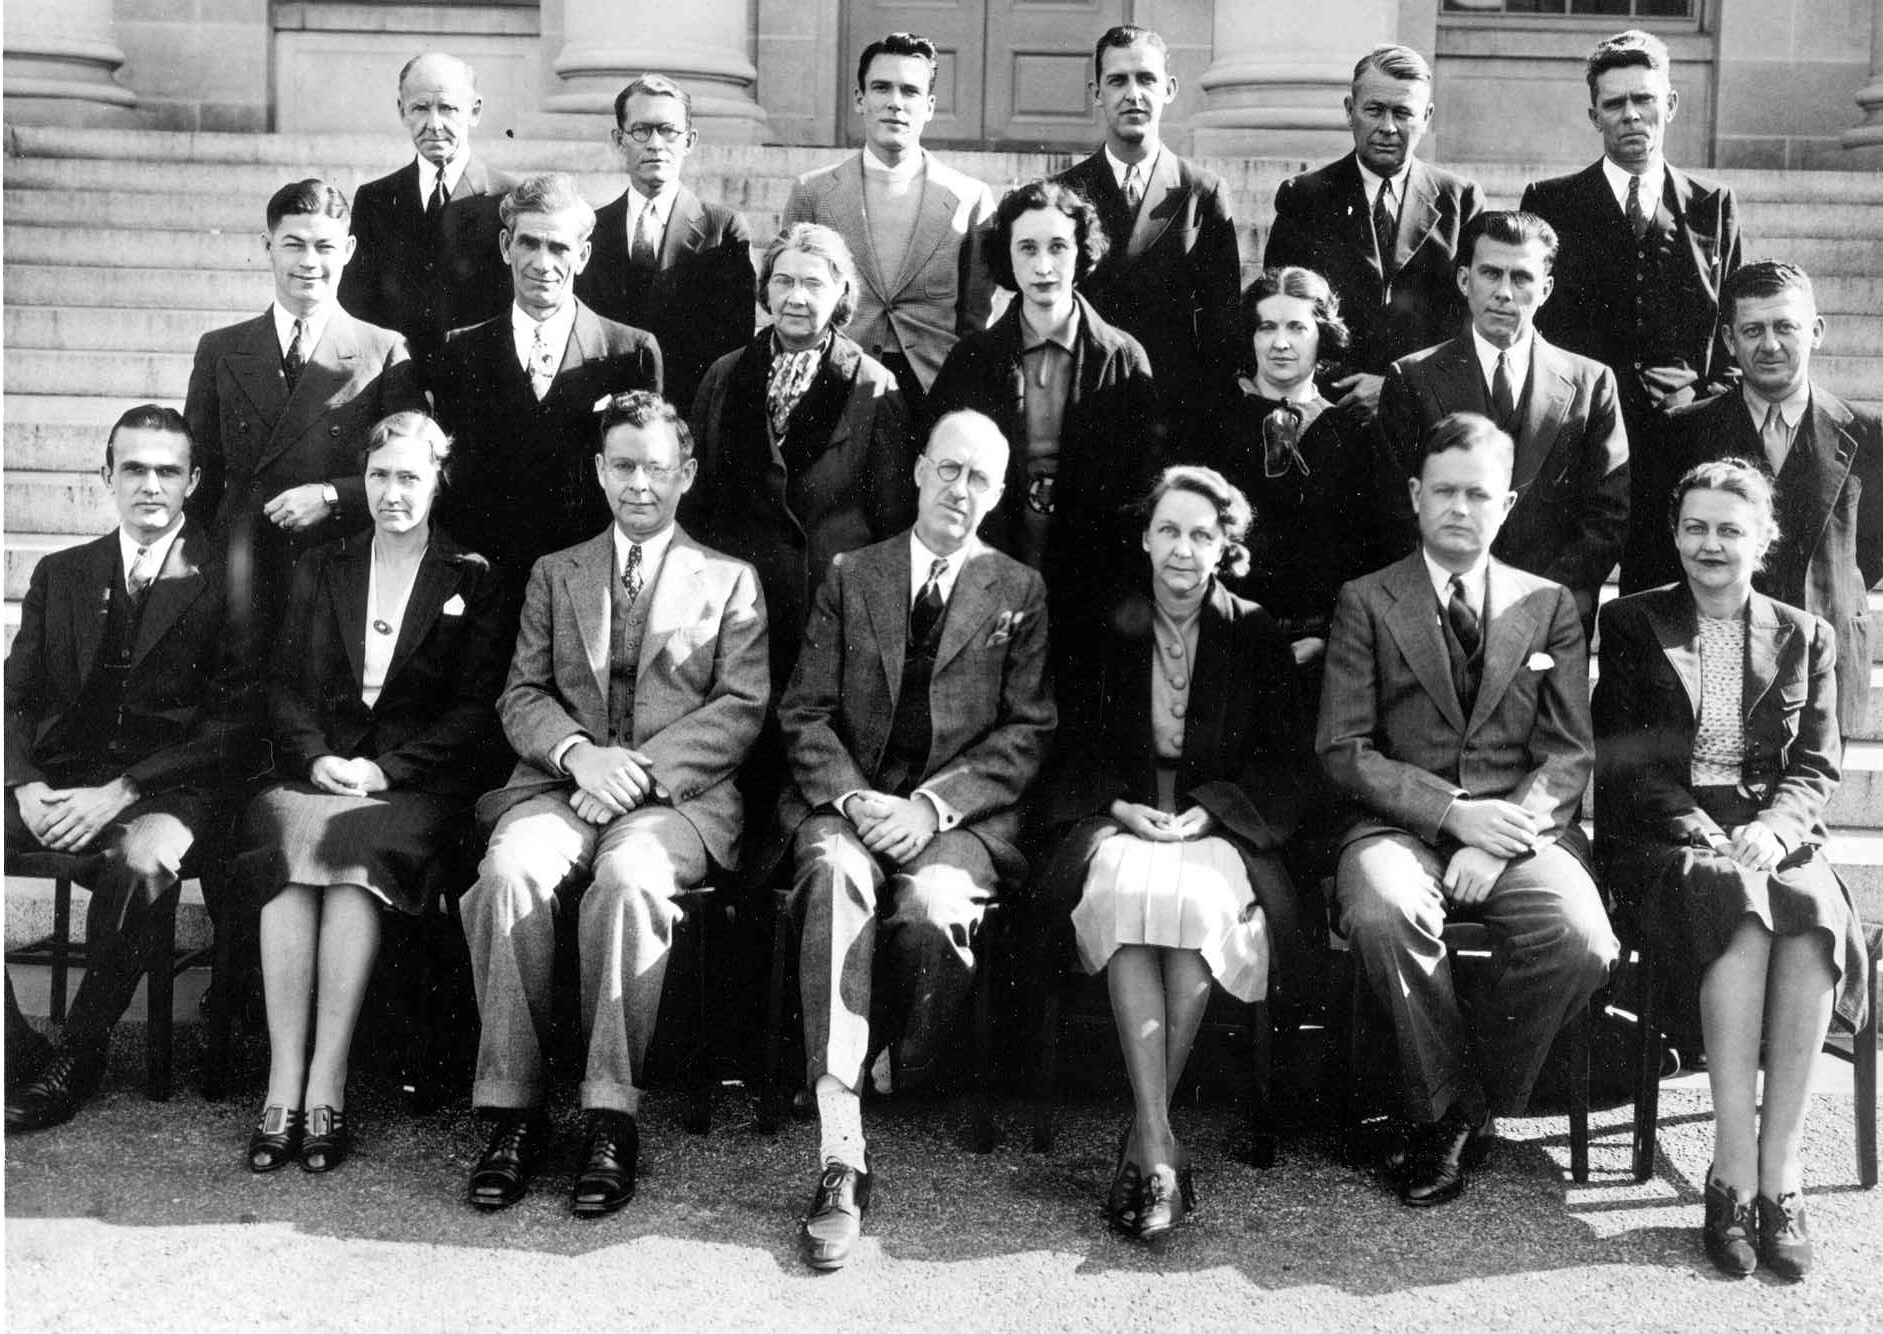 Staff Members of the Division of Biologics Control, 1938